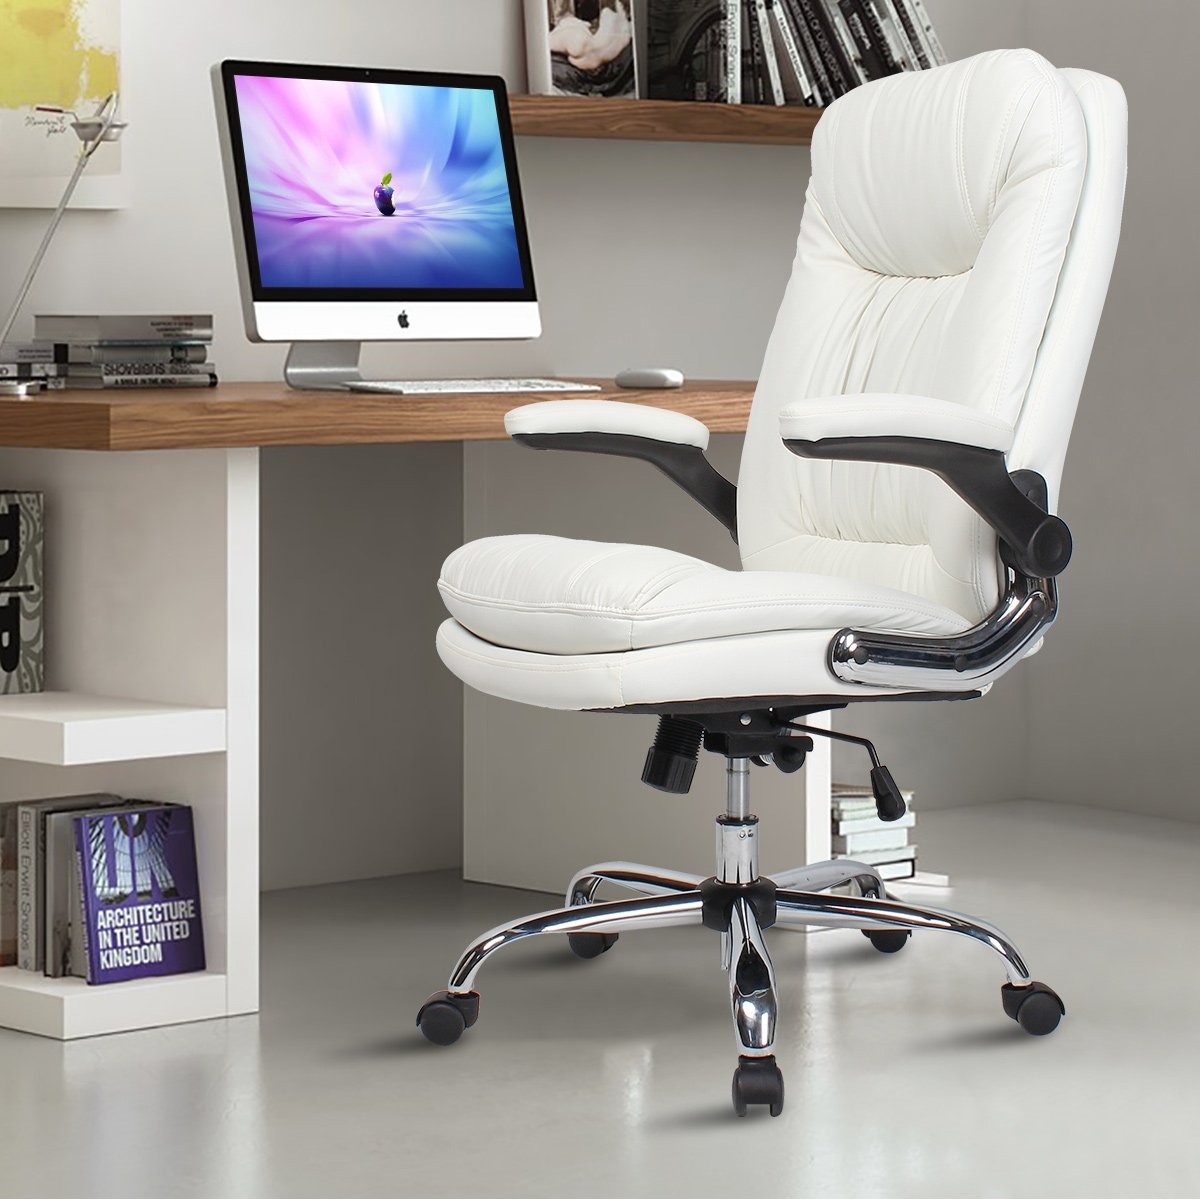 7 Top Picks for Luxury Leather Office Chairs